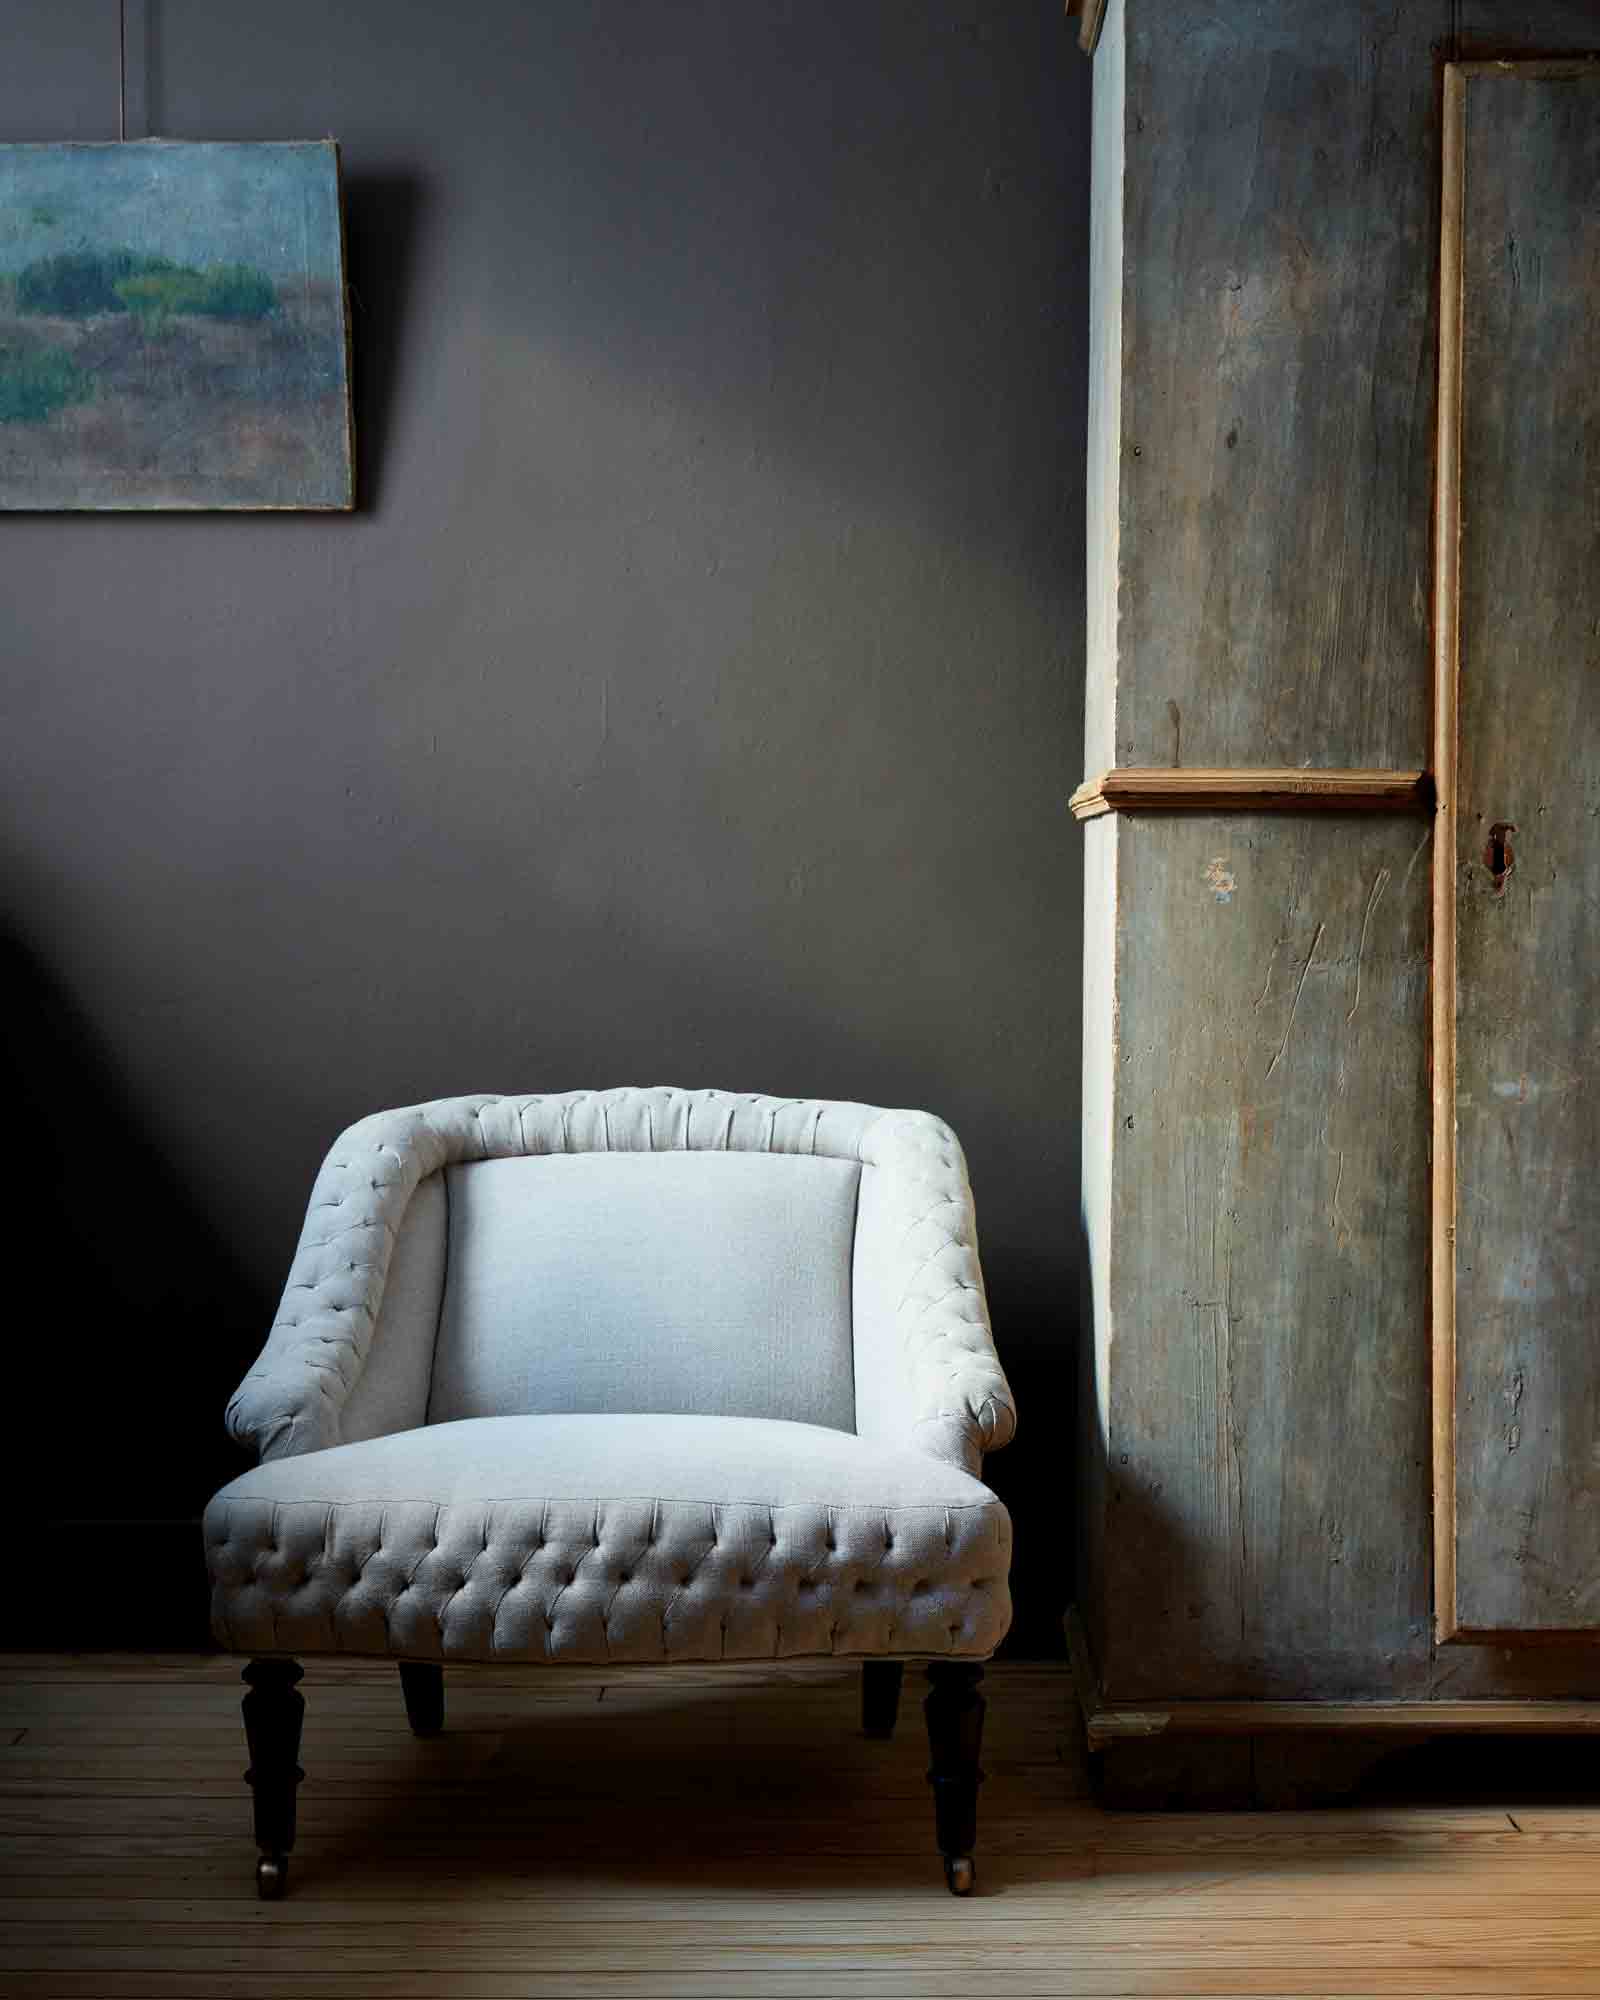  Royal chair in Vintage Flax. In the background are dark colored walls with a painting hanging. Photographed in Vintage Flax. 